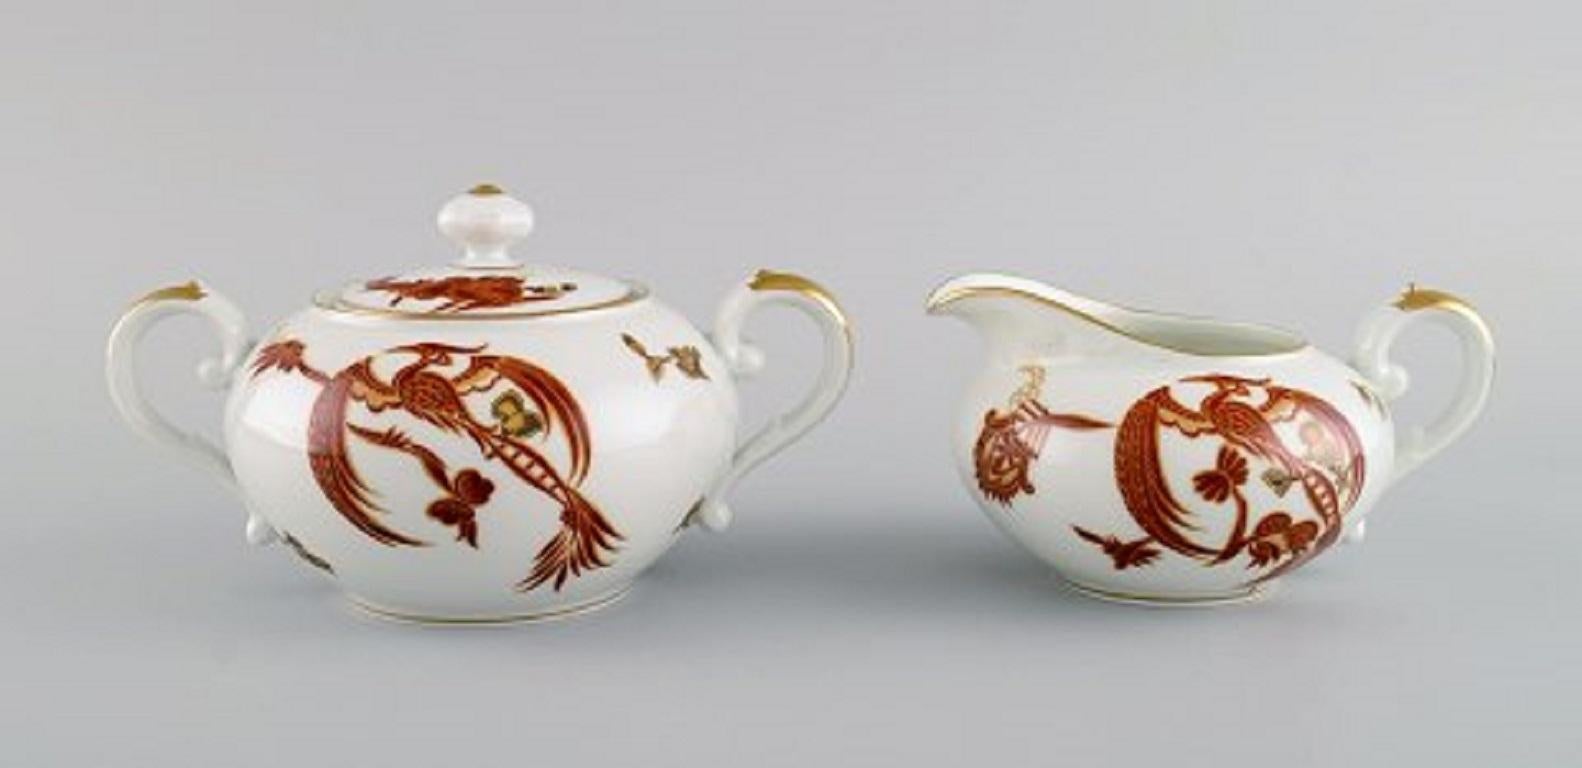 Rosenthal Elite tea service in hand-painted porcelain for six people. Japanism, 1930s / 40s.
Consisting of six teacups with saucers, six plates, sugar / cream set, and teapot.
The cup measures: 9.5 x 5 cm.
Saucer diameter: 15 cm.
The teapot